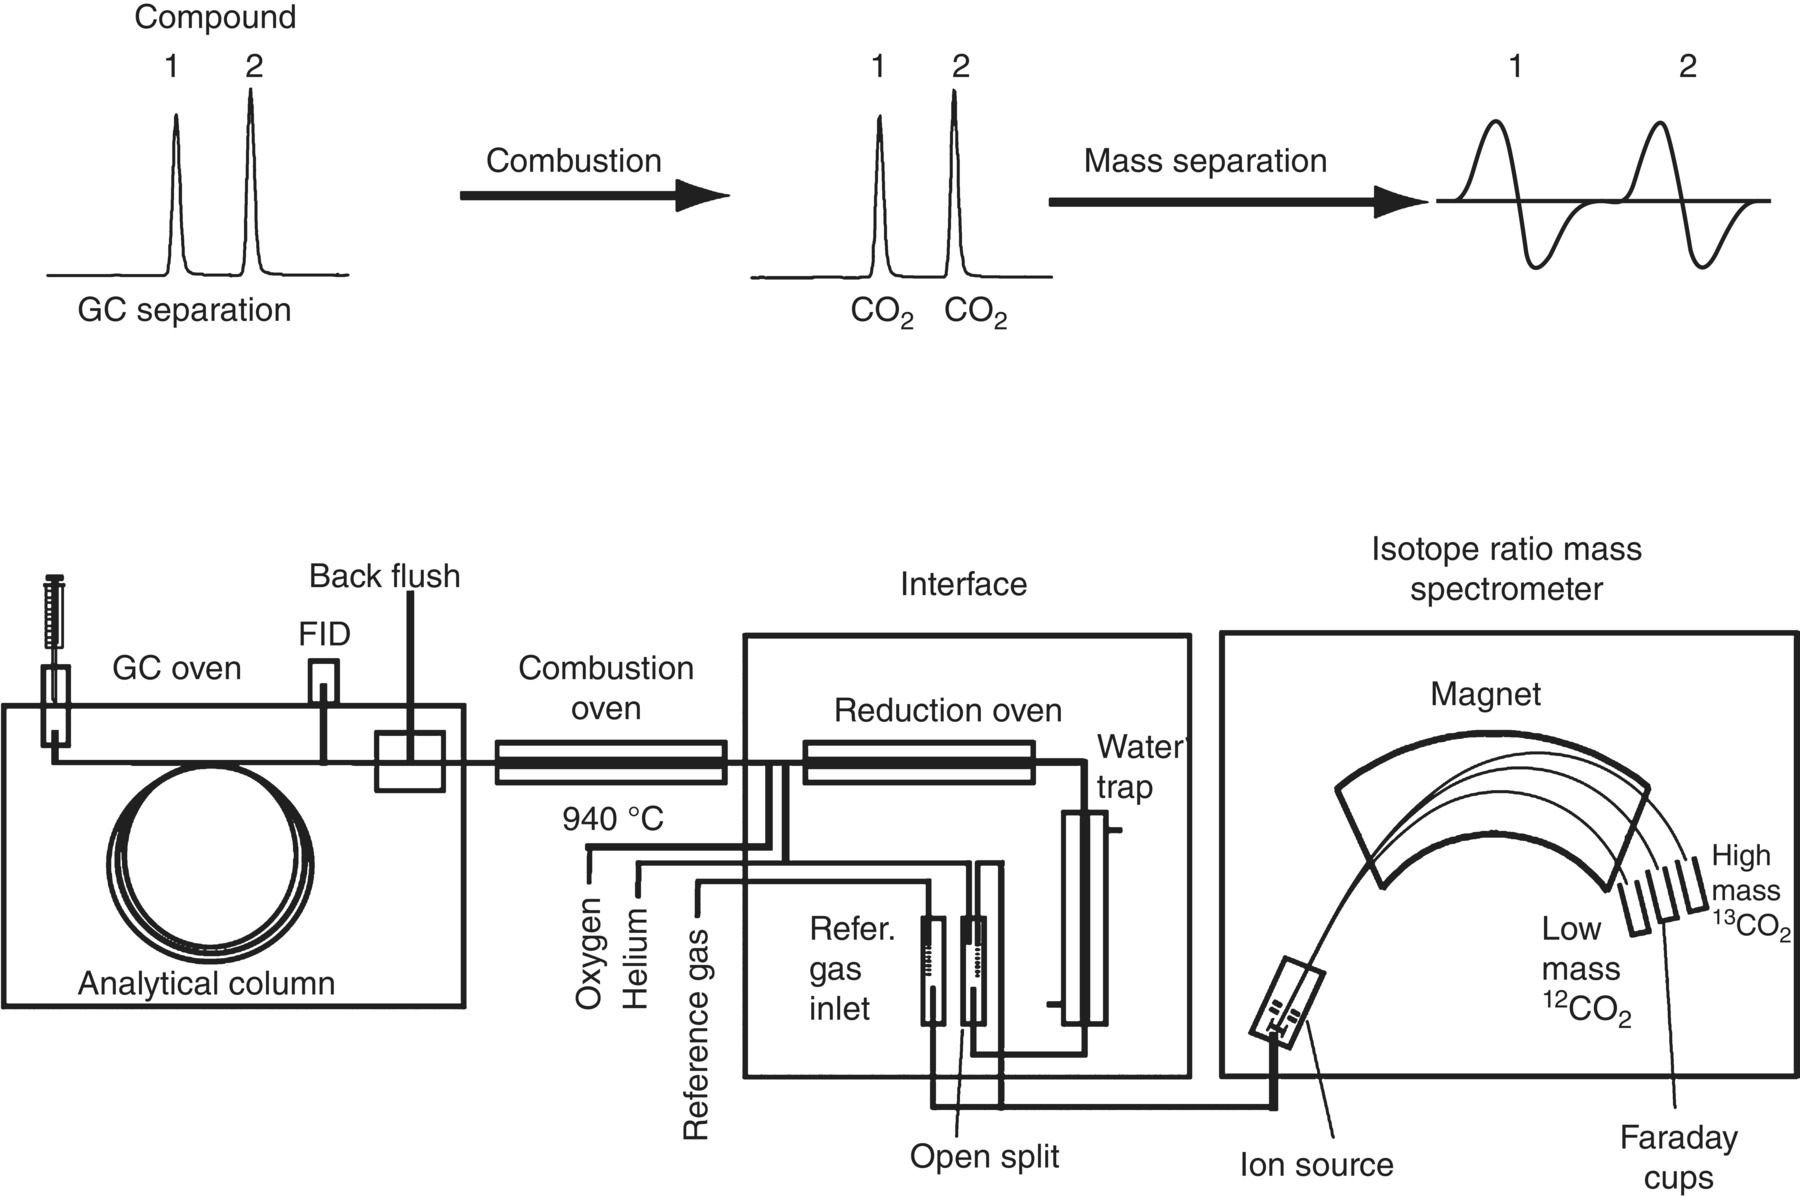 Schematic diagram of GC-IRMS with GC oven, analytical column, FID, back flush, combustion oven, reduction oven, water trap, open split, ion source, magnet, Faraday cups, etc. being marked.